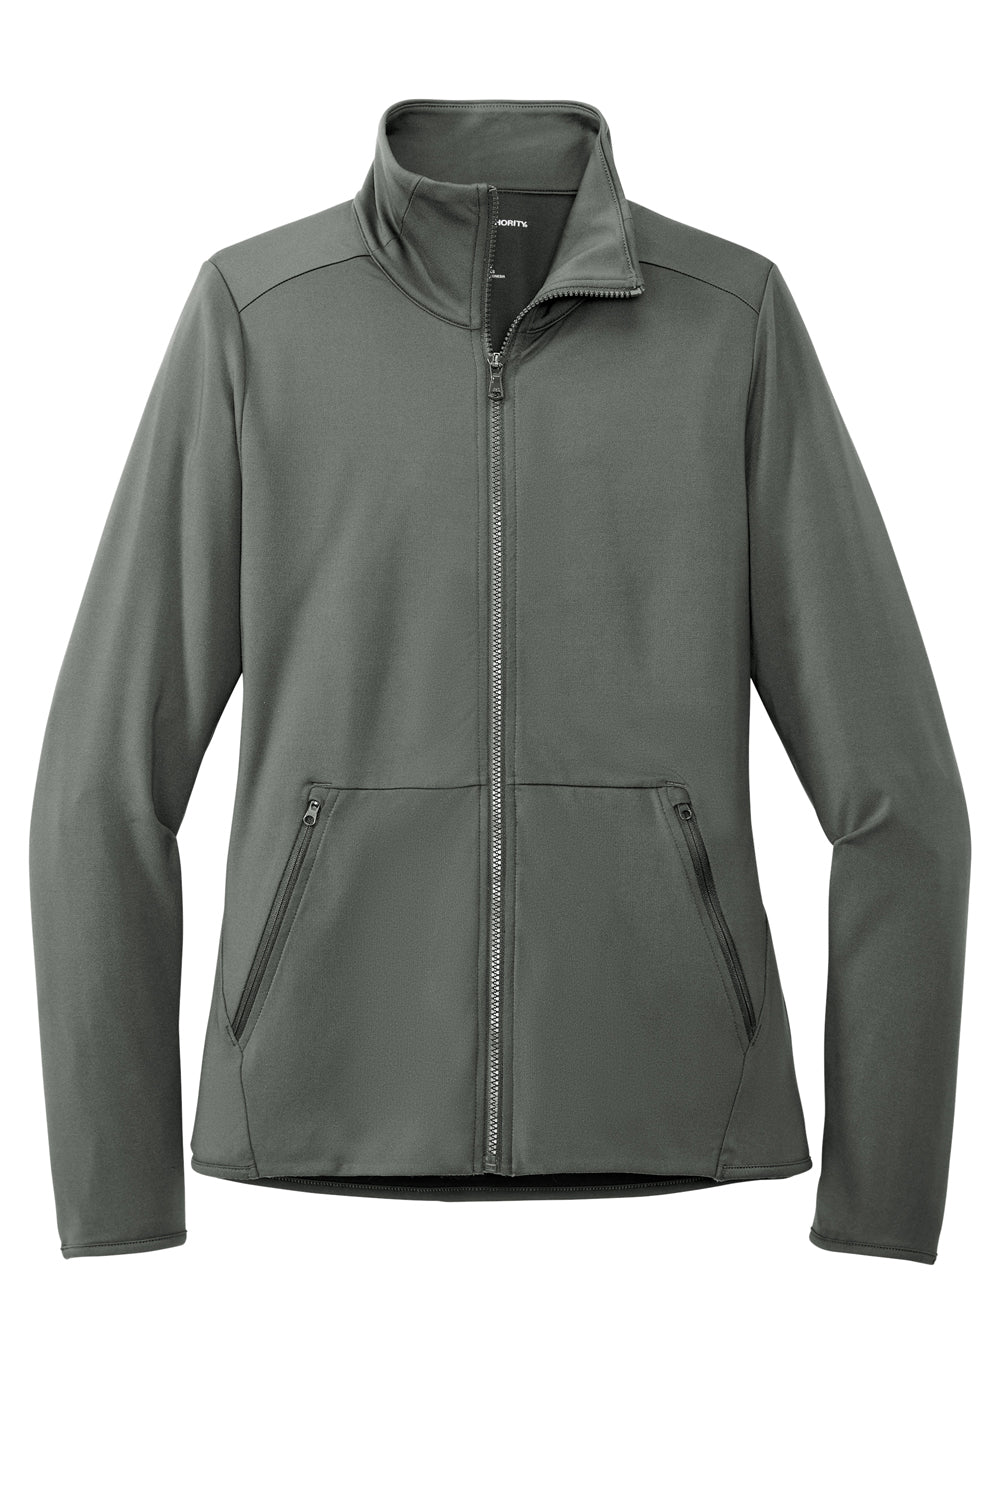 Port Authority LK595 Womens Accord Stretch Fleece Full Zip Jacket Pewter Grey Flat Front